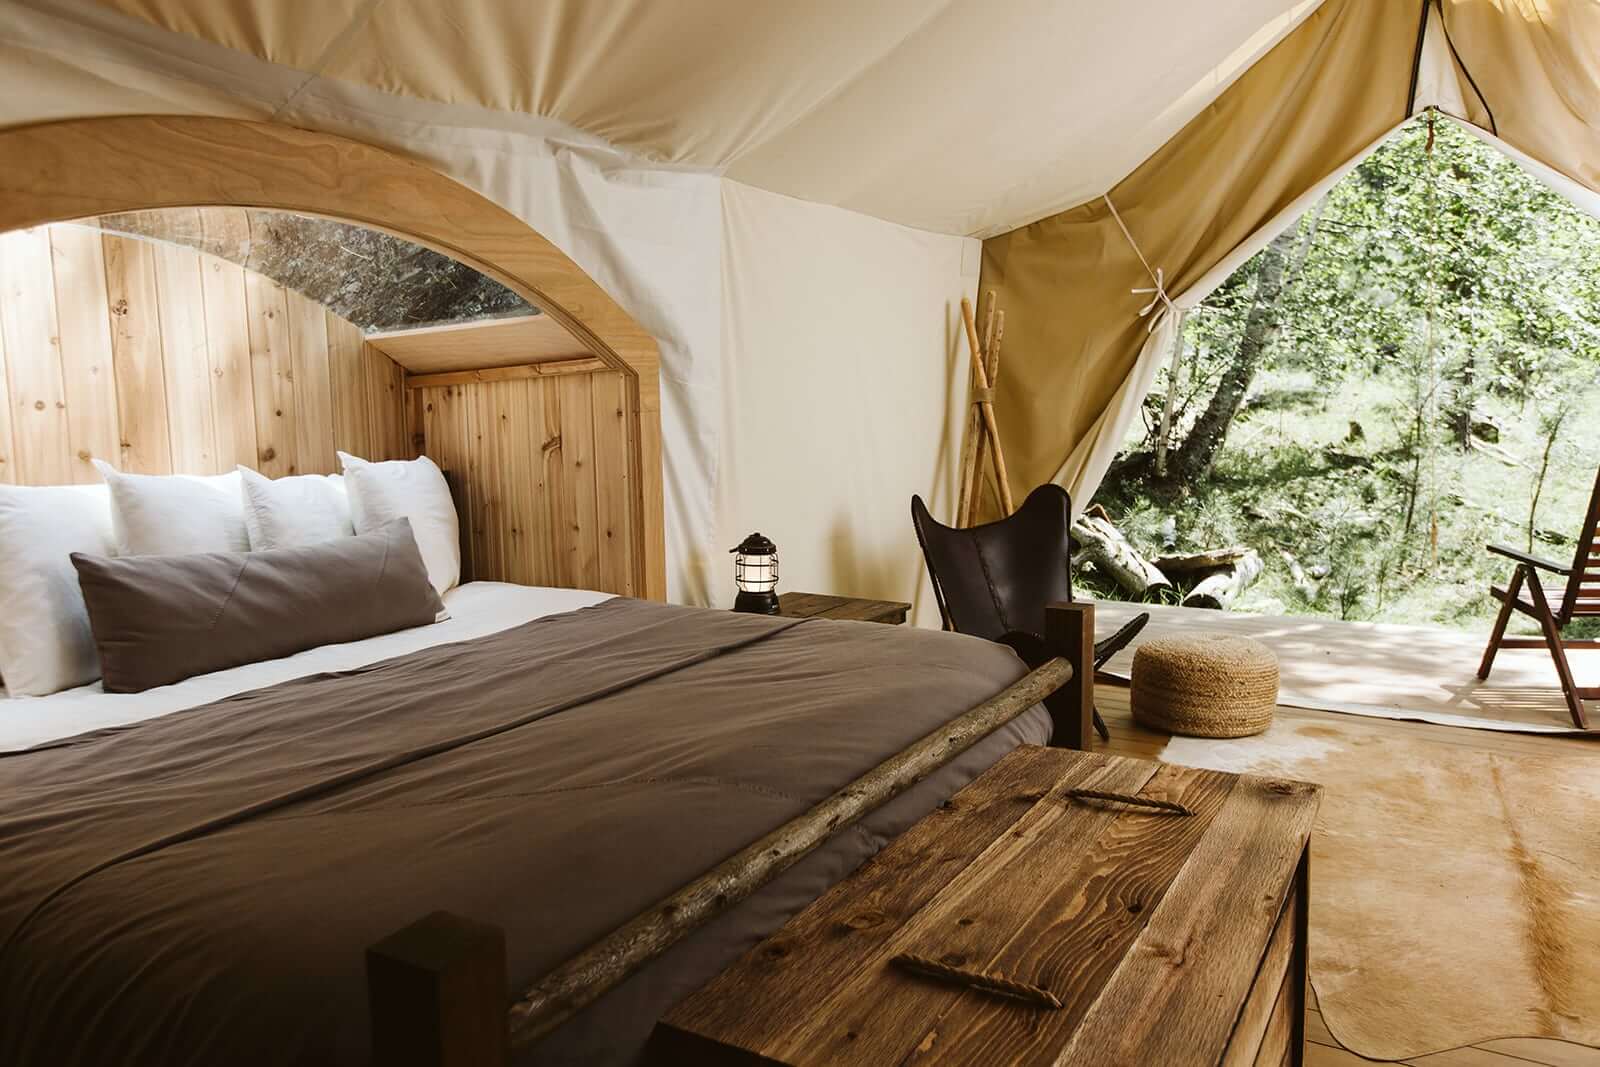 Inside a luxury glamping tent with bed and seating areas